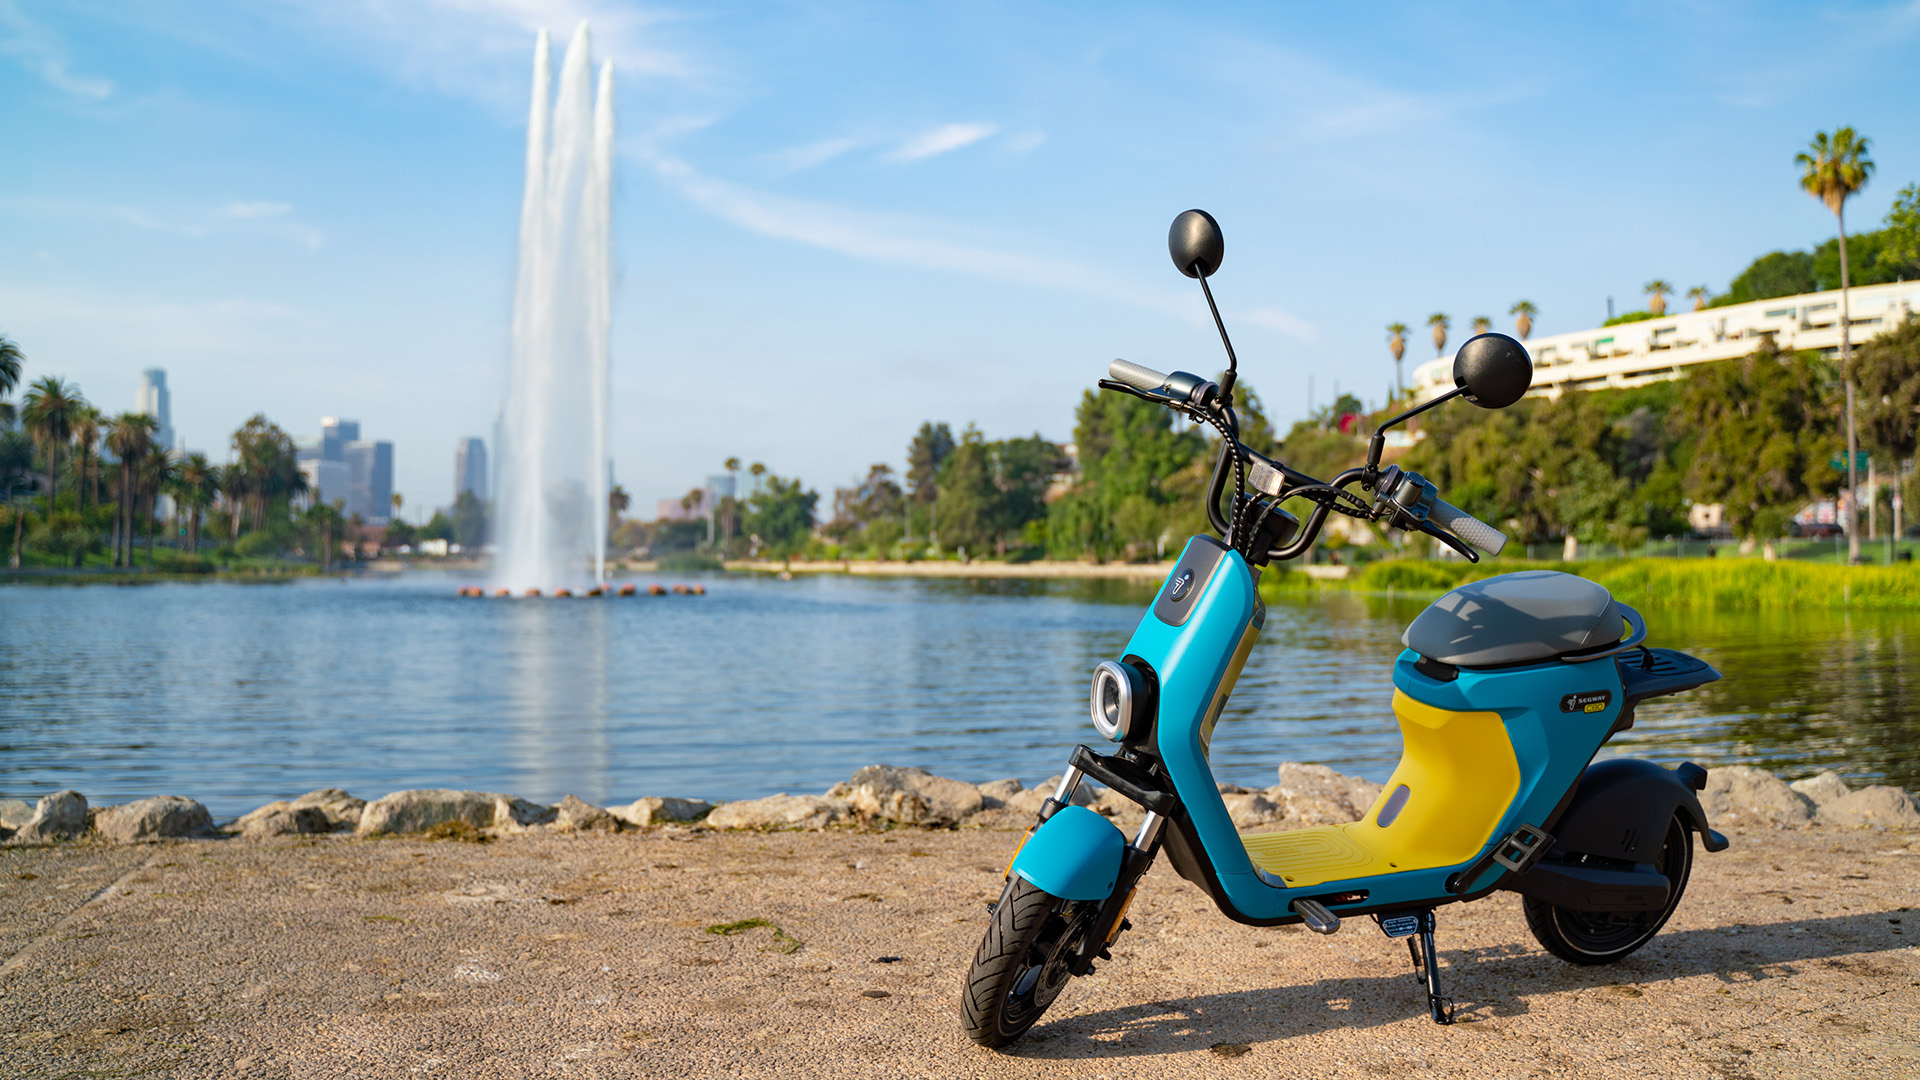 Segway eMoped C80: Hands-on with Segway's first smart e-bike - CNET